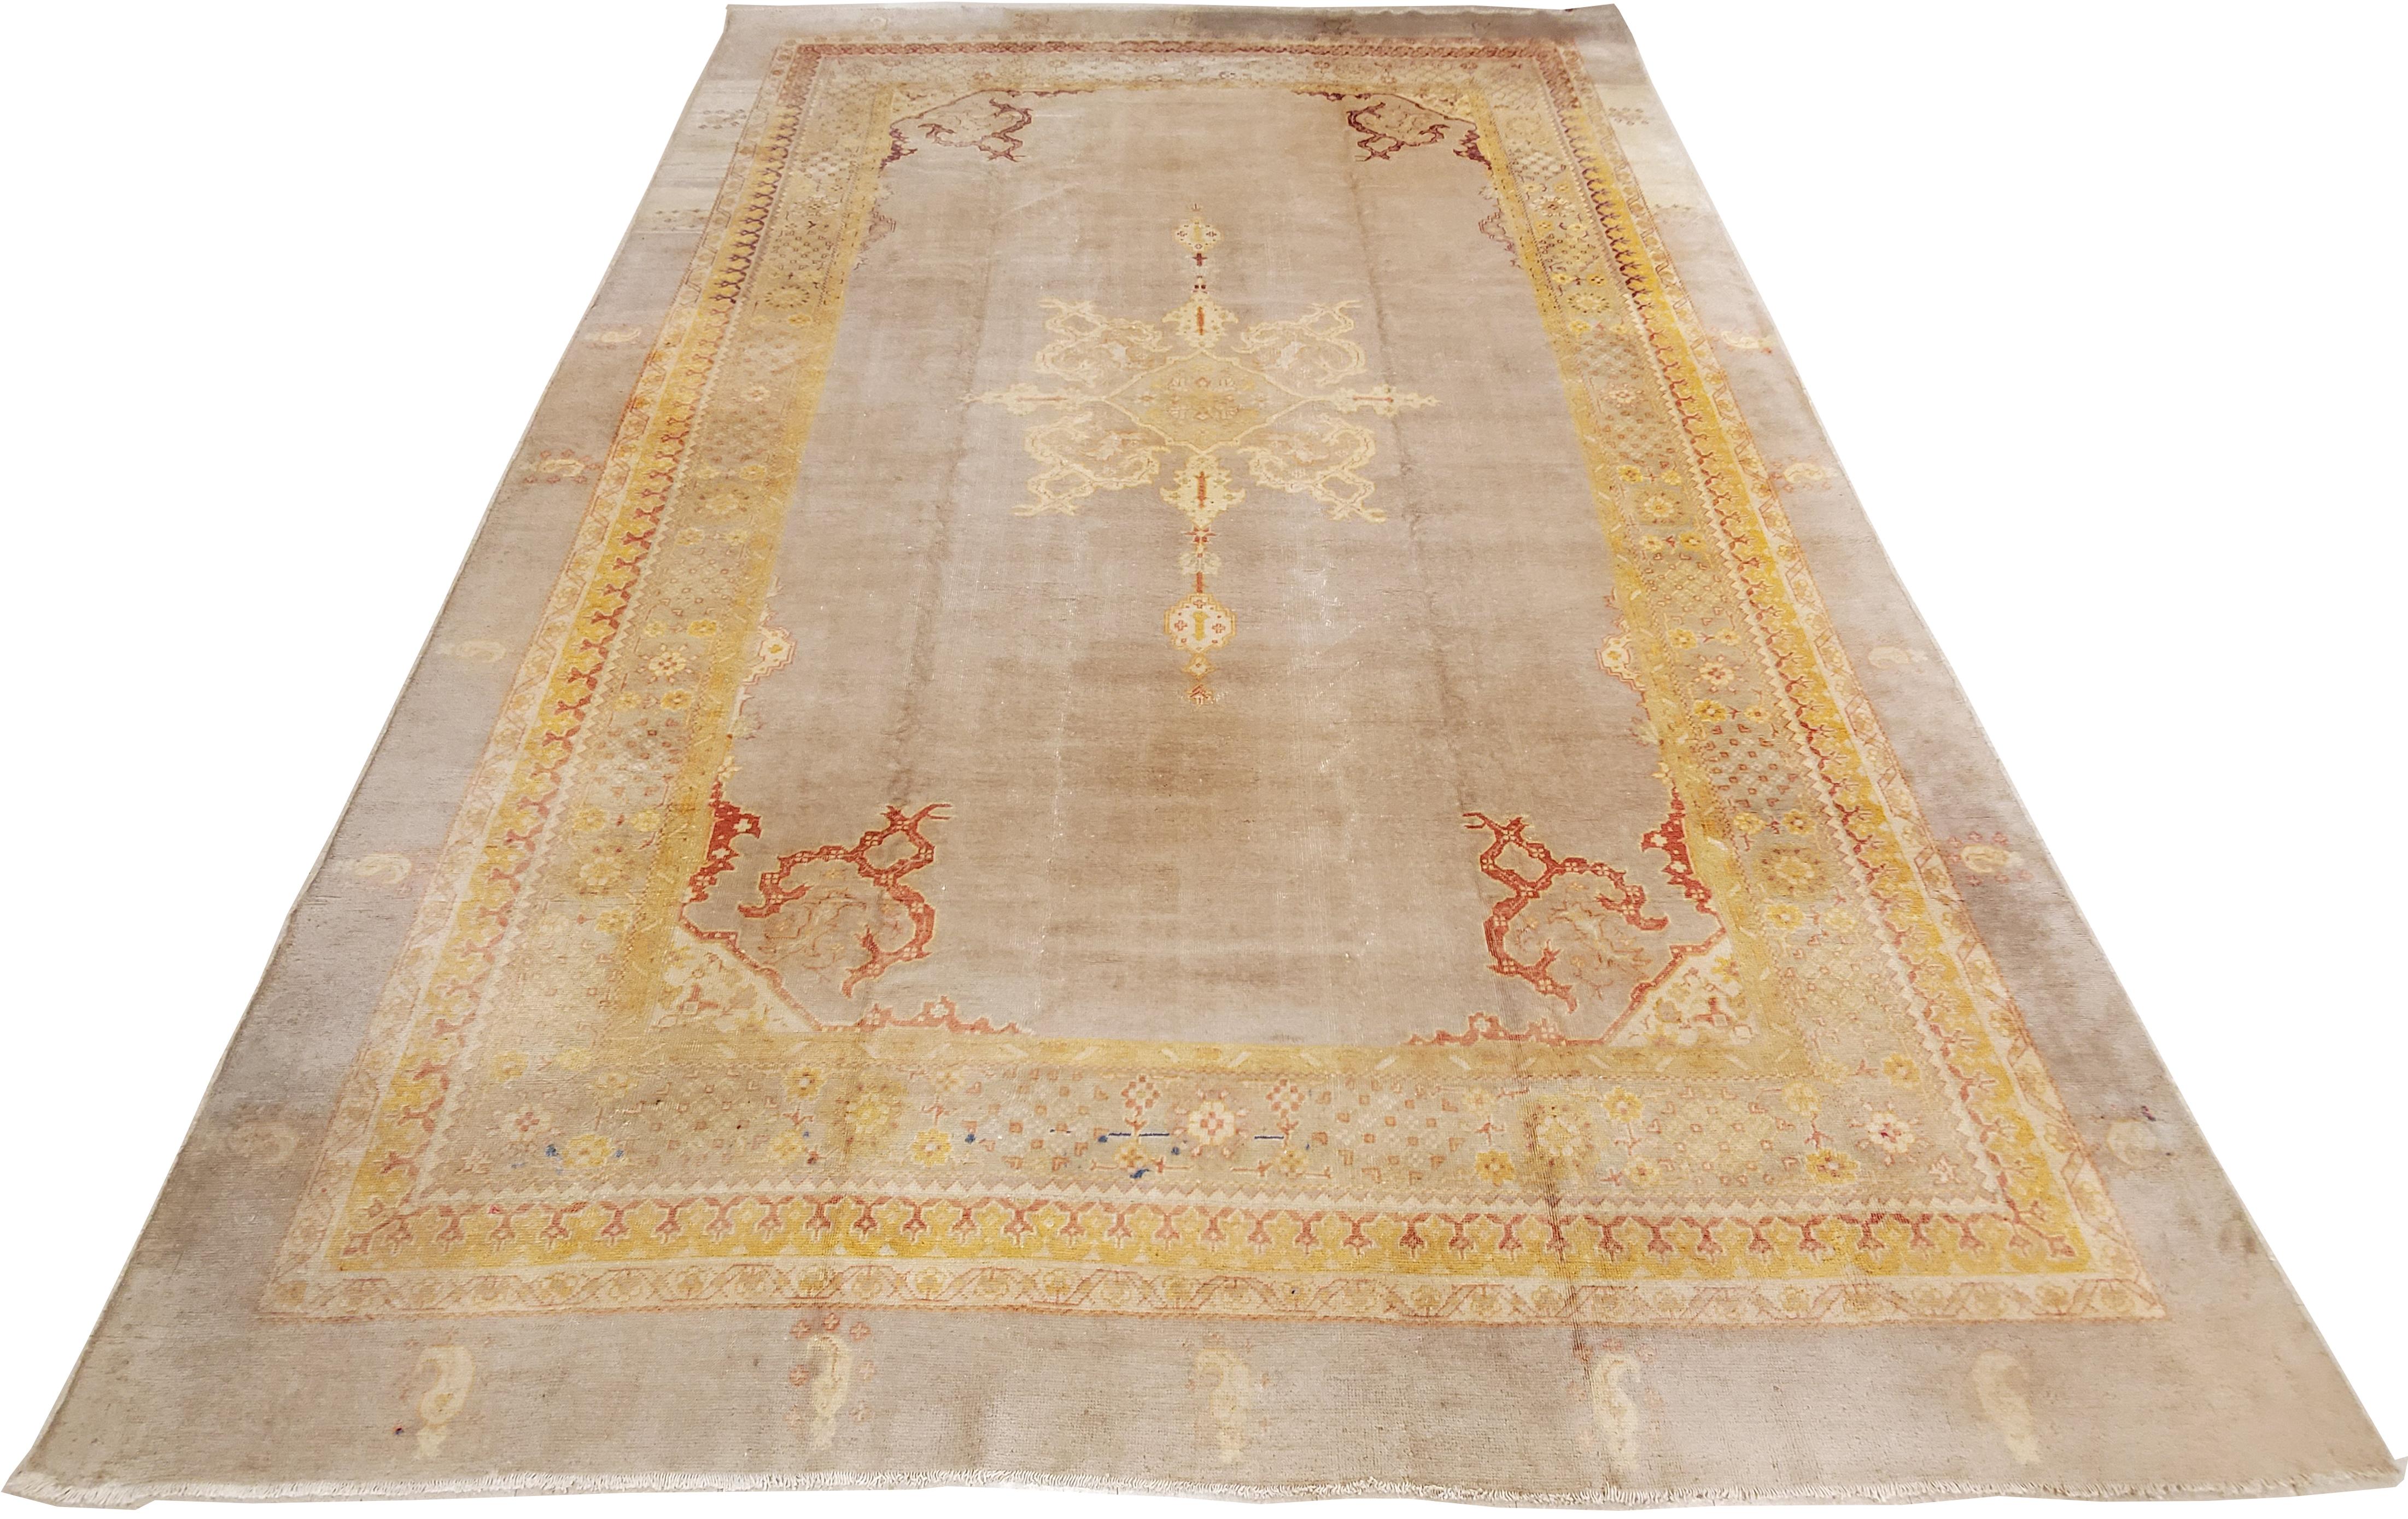 Oushak rugs, also known as Ushak rugs, are woven in Western Turkey and have distinct designs, such as angular large-scale floral patterns. They usually evoke a calmness and peacefulness in a room. To this day, production of Oushak rugs continues